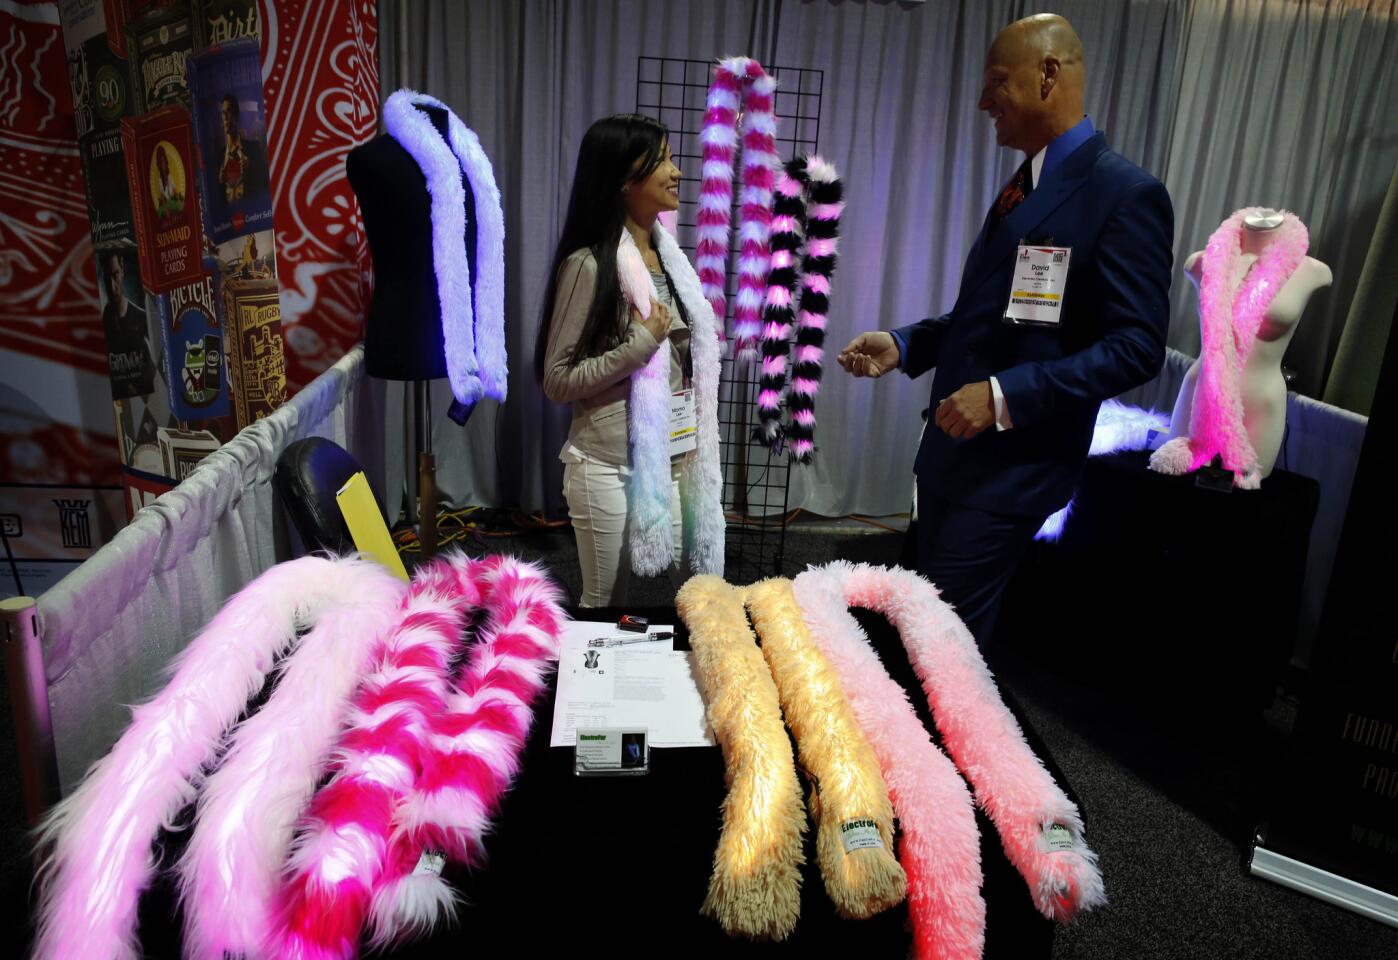 David and MoMo Lee show off Electrofur boas at the Advertising Specialty Institute's promotional products convention at the Long Beach Convention Center.